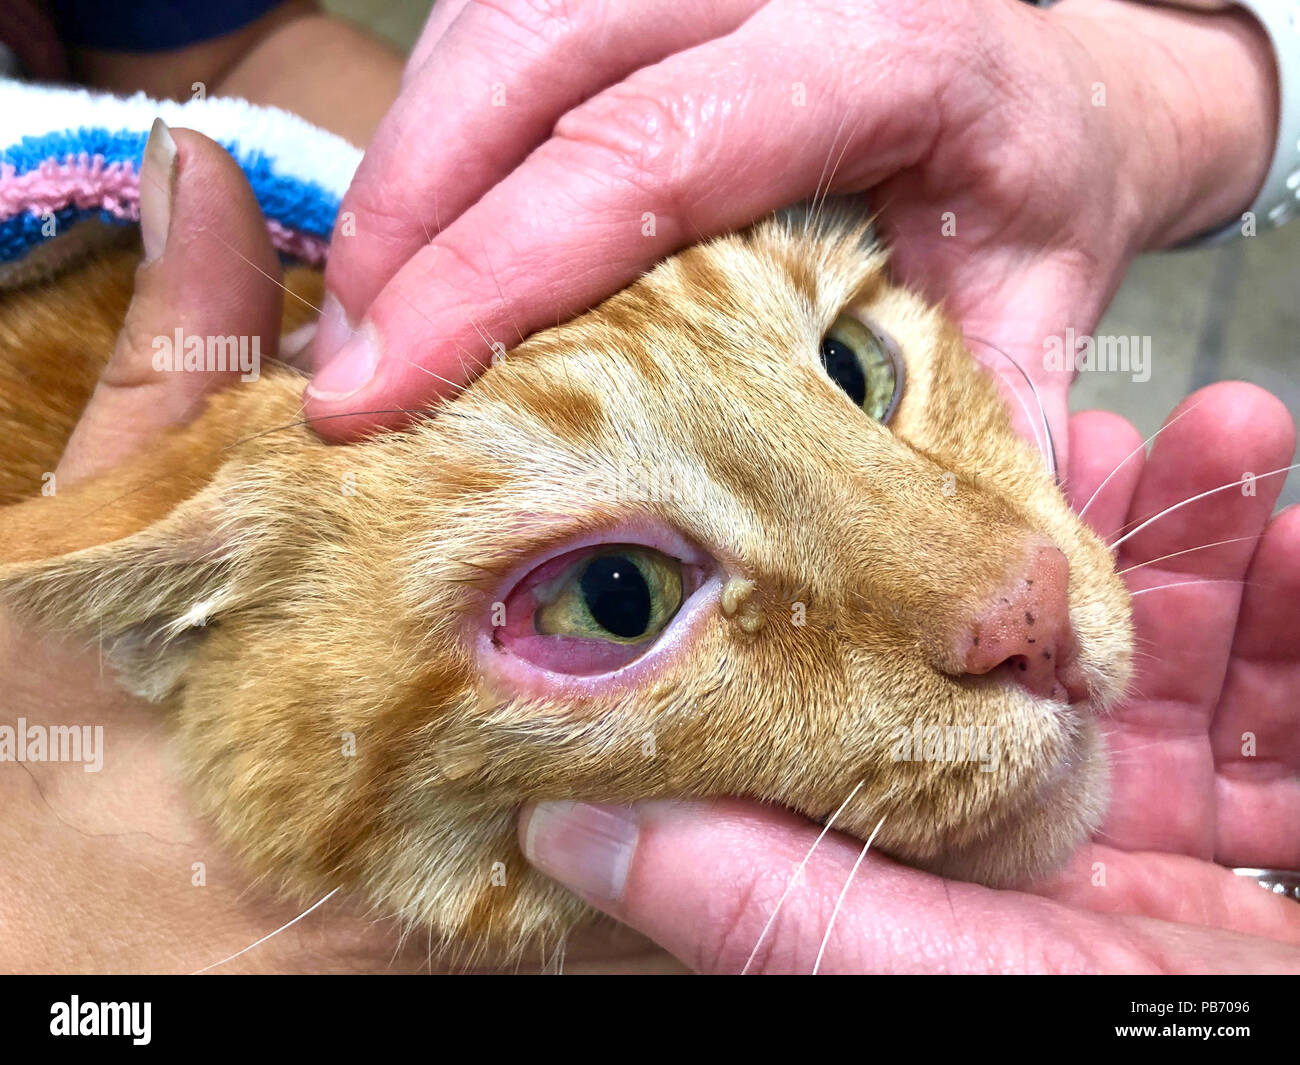 Close up on Orange Tabby Cat face being held by multiple hands to assess trauma to eye, red, swollen conjunctiva with laceration and exudate. Stock Photo